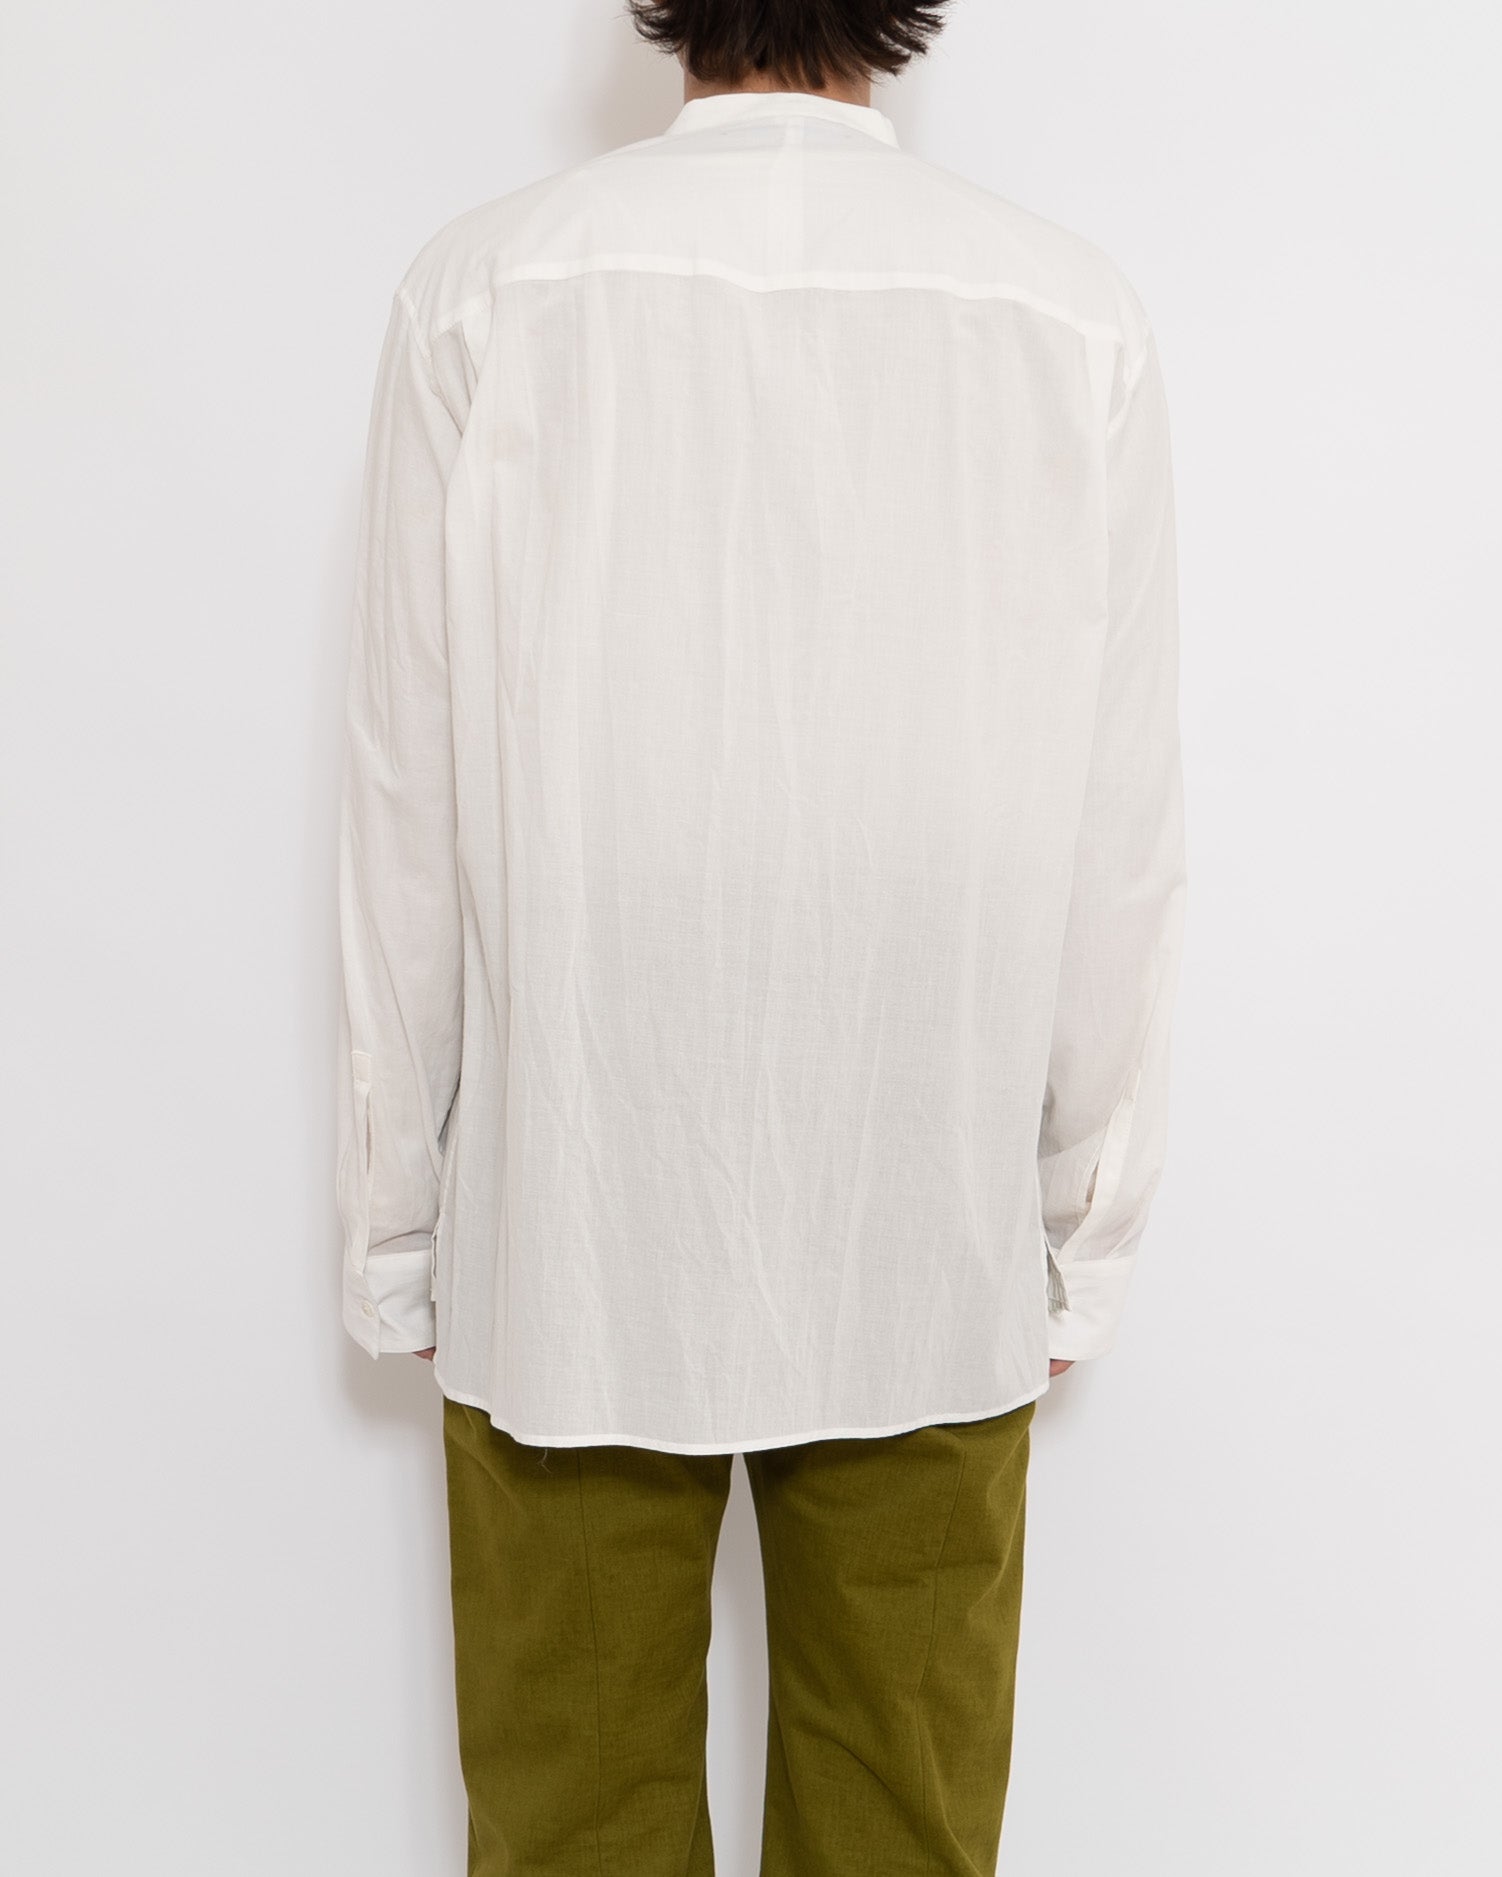 SS19 Contrast Detail Ivory Shirt